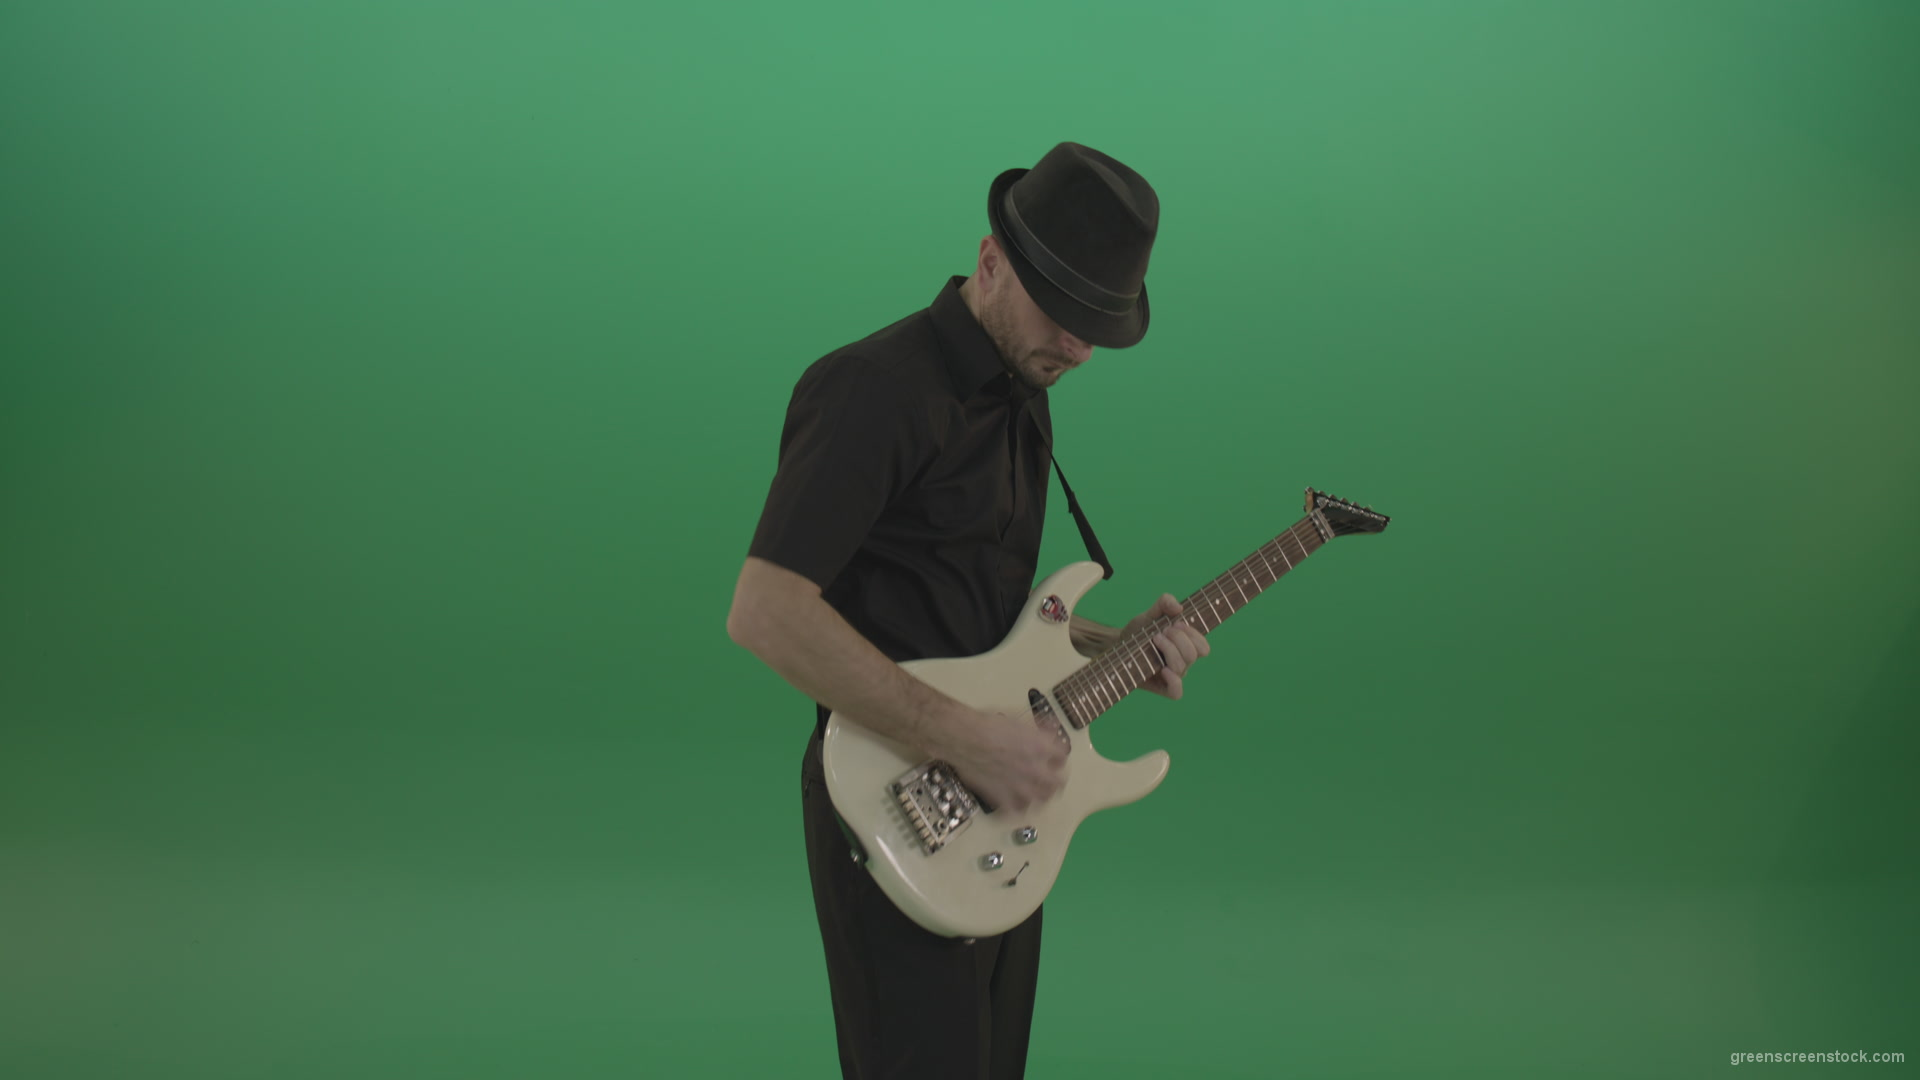 Virtuoso-guitarist-in-black-costume-and-hat-playing-solo-on-white-electro-guitar-siolated-on-green-screen_006 Green Screen Stock